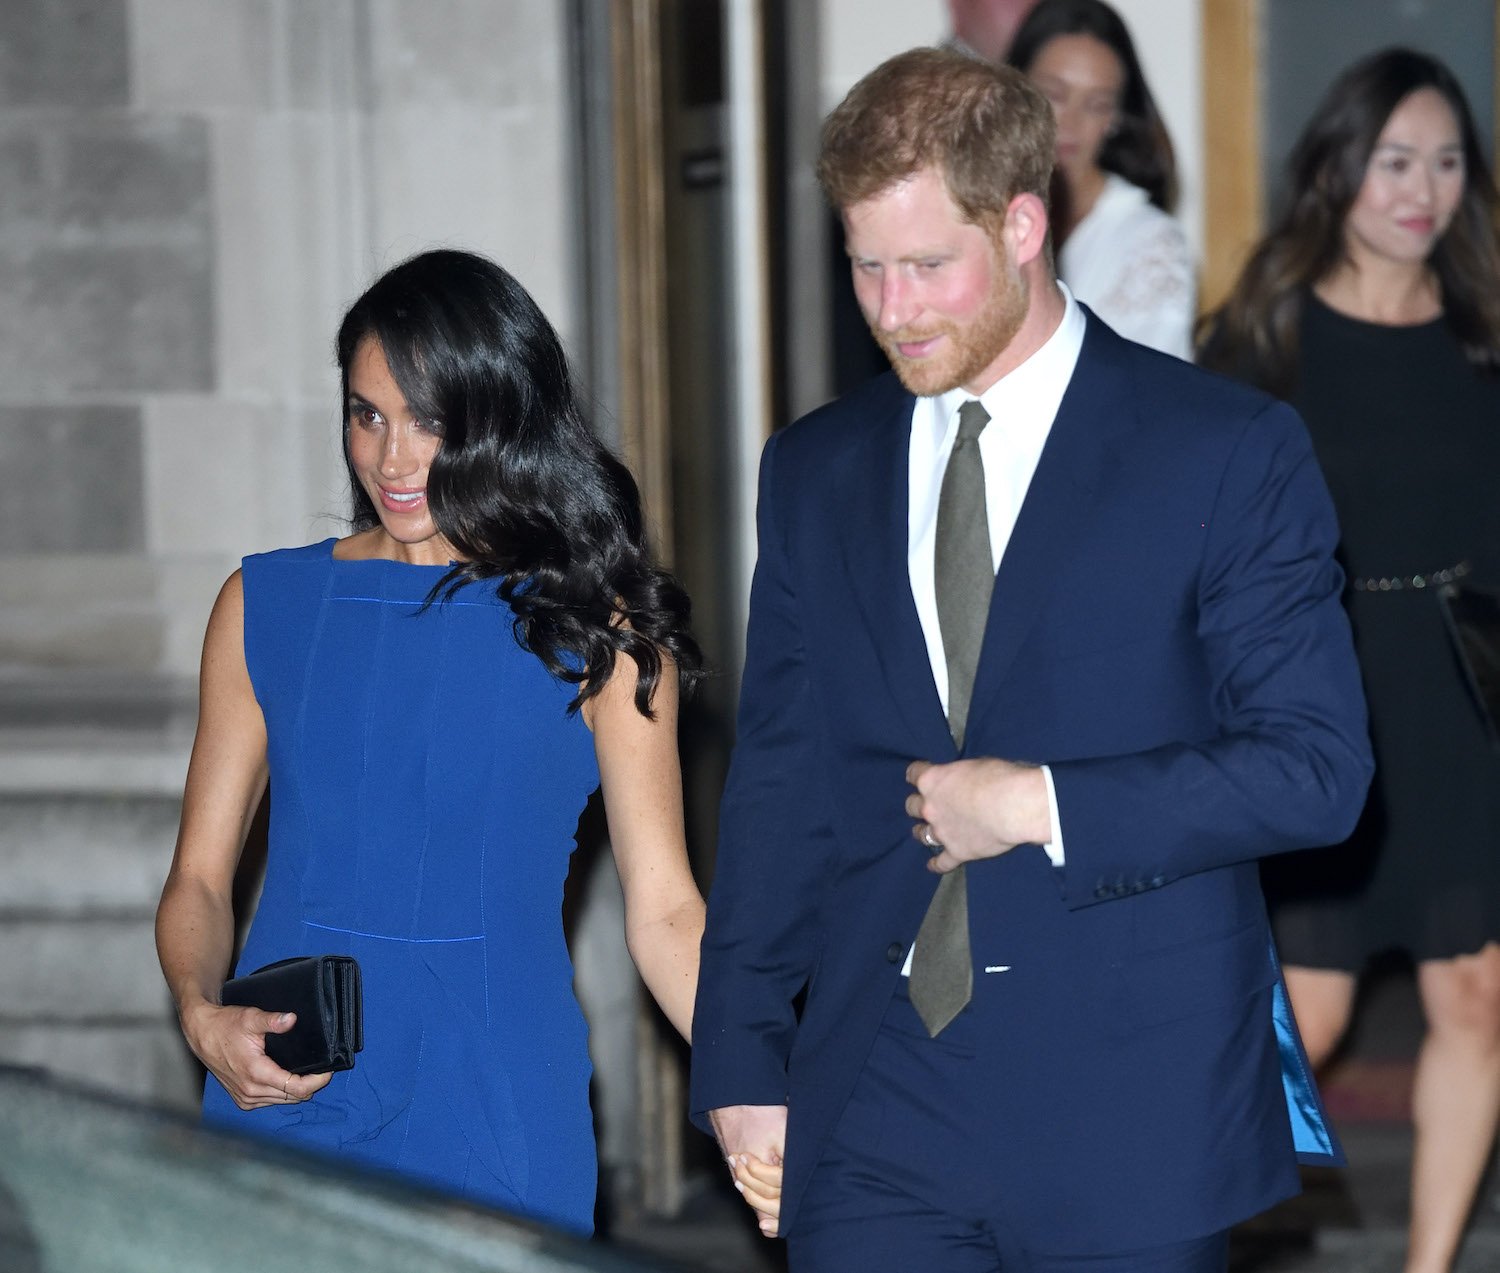 Meghan Markle wears a blue dress and looks to the side while smiling as she holds hands with Prince Harry, wearing a suit and tie, after leaving the 100 Days to Peace concert in 2018